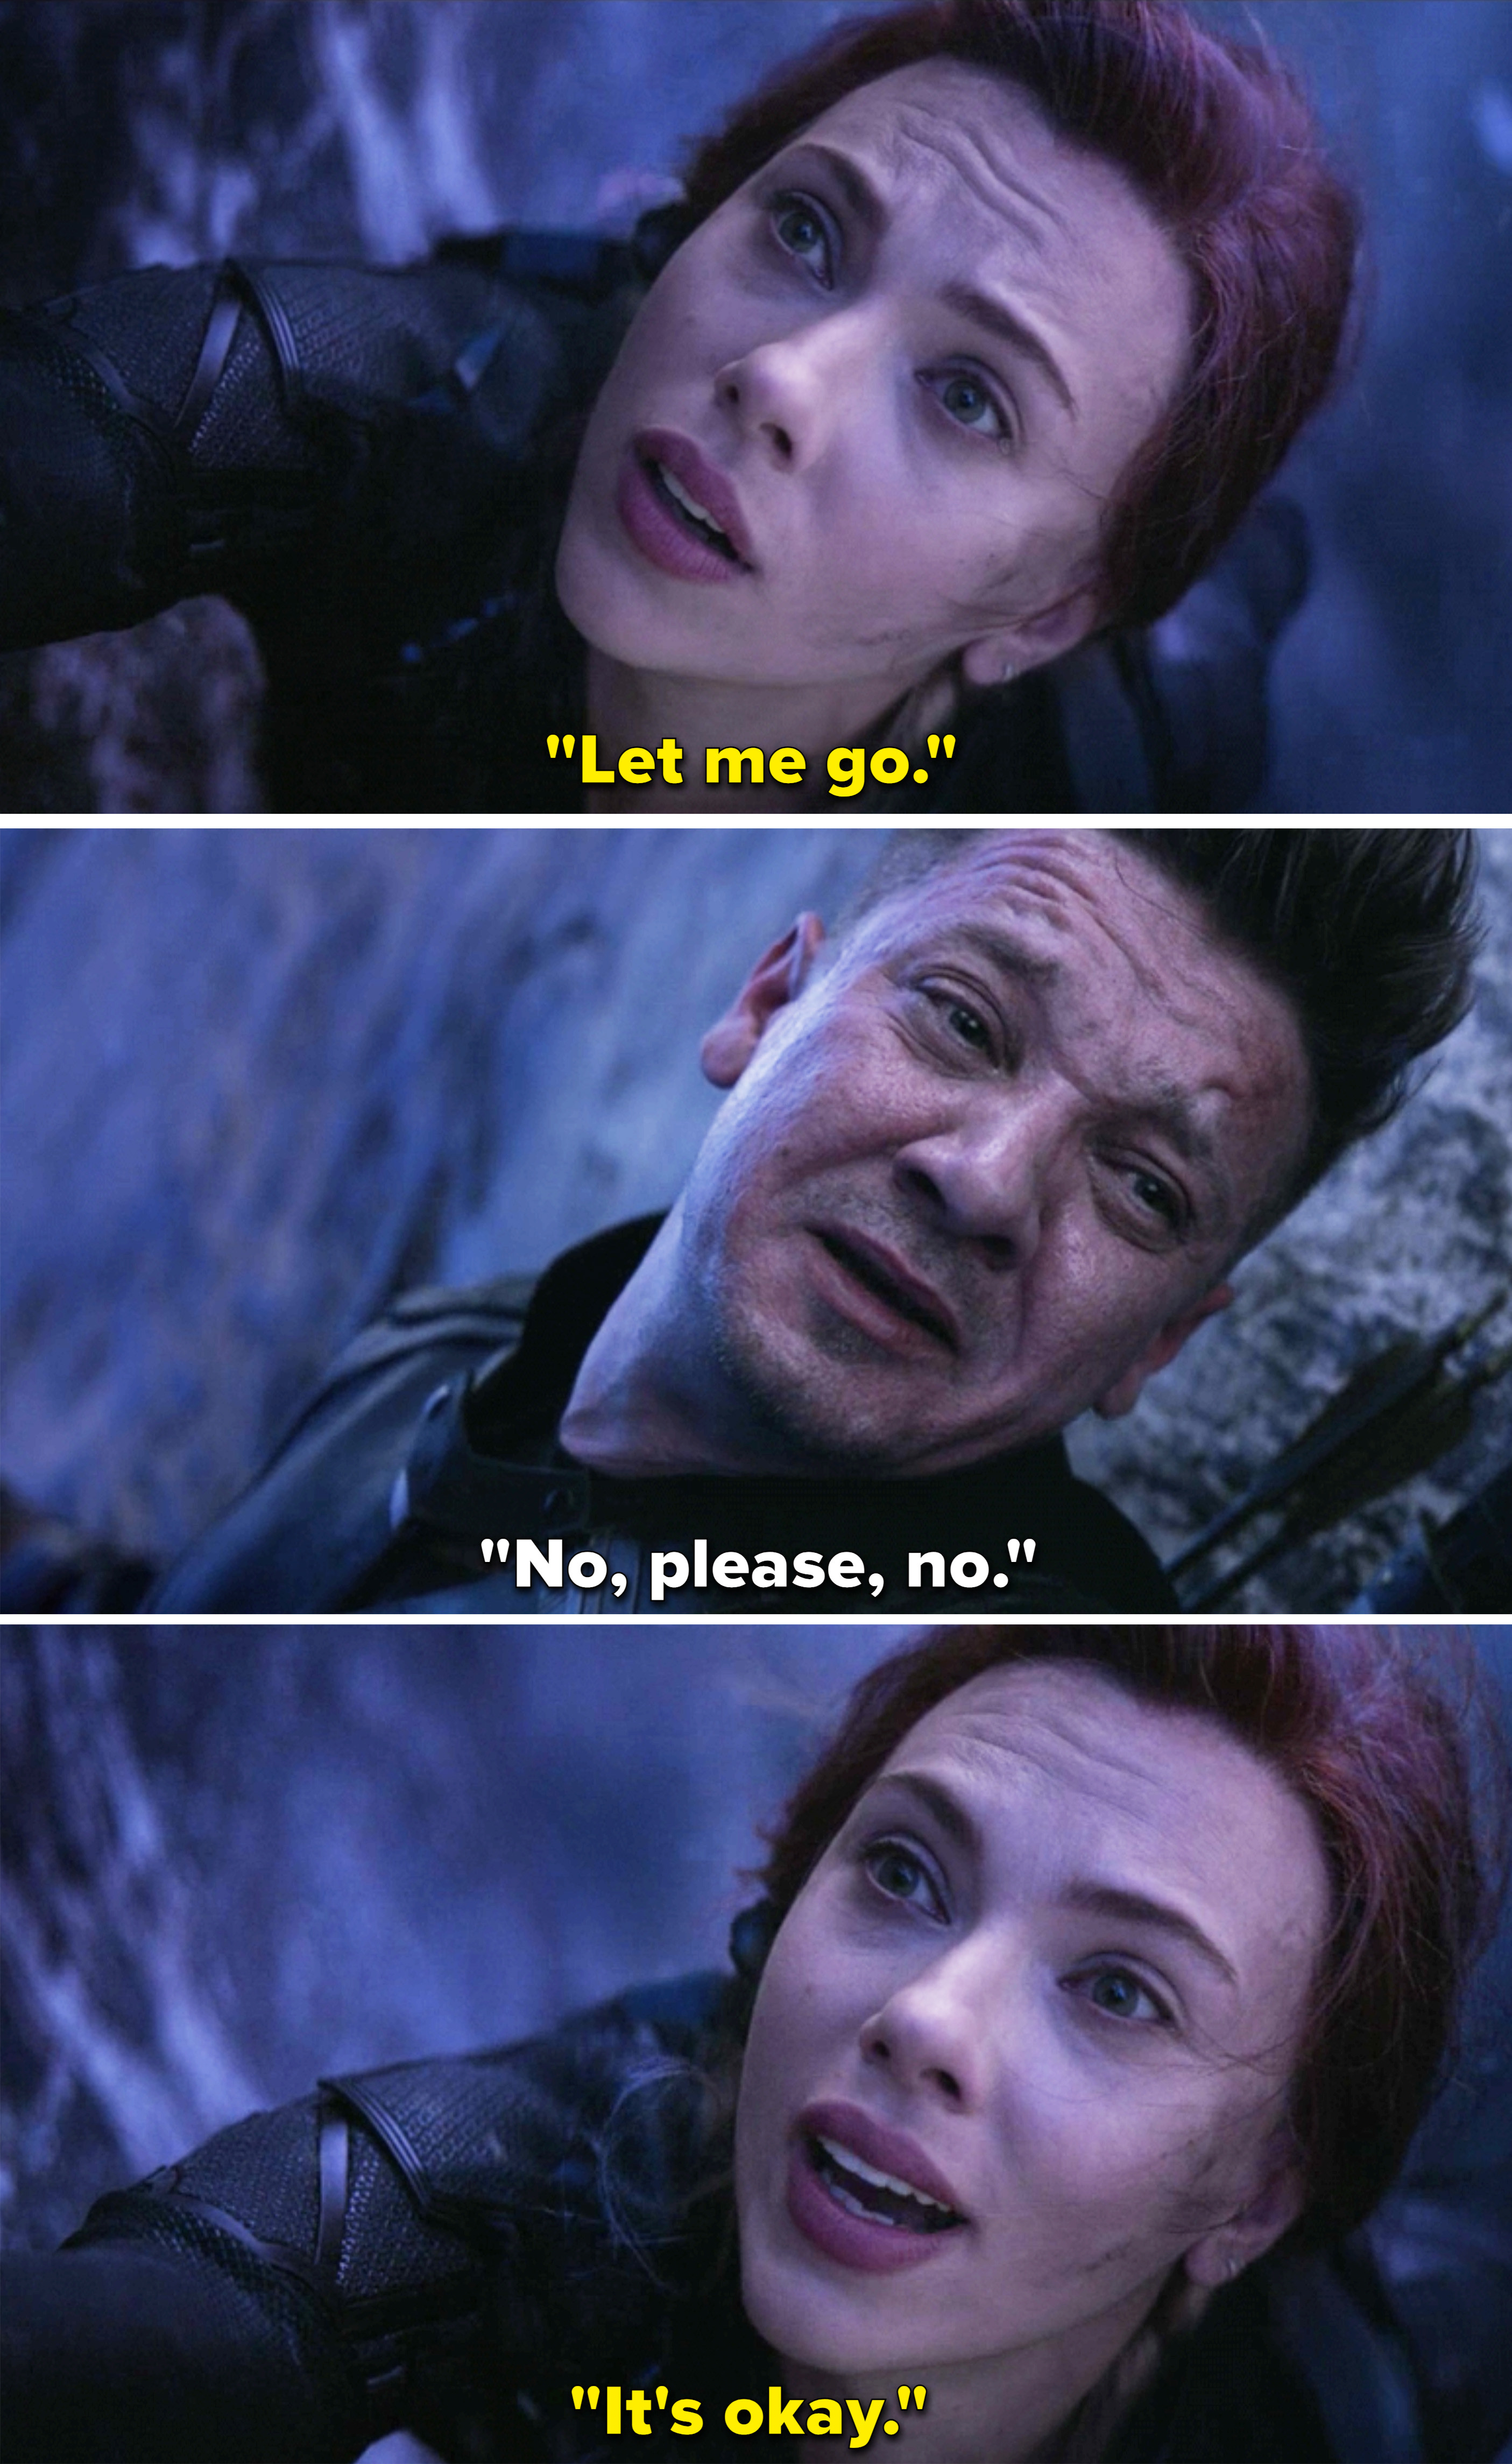 Natasha telling Clint to let her go